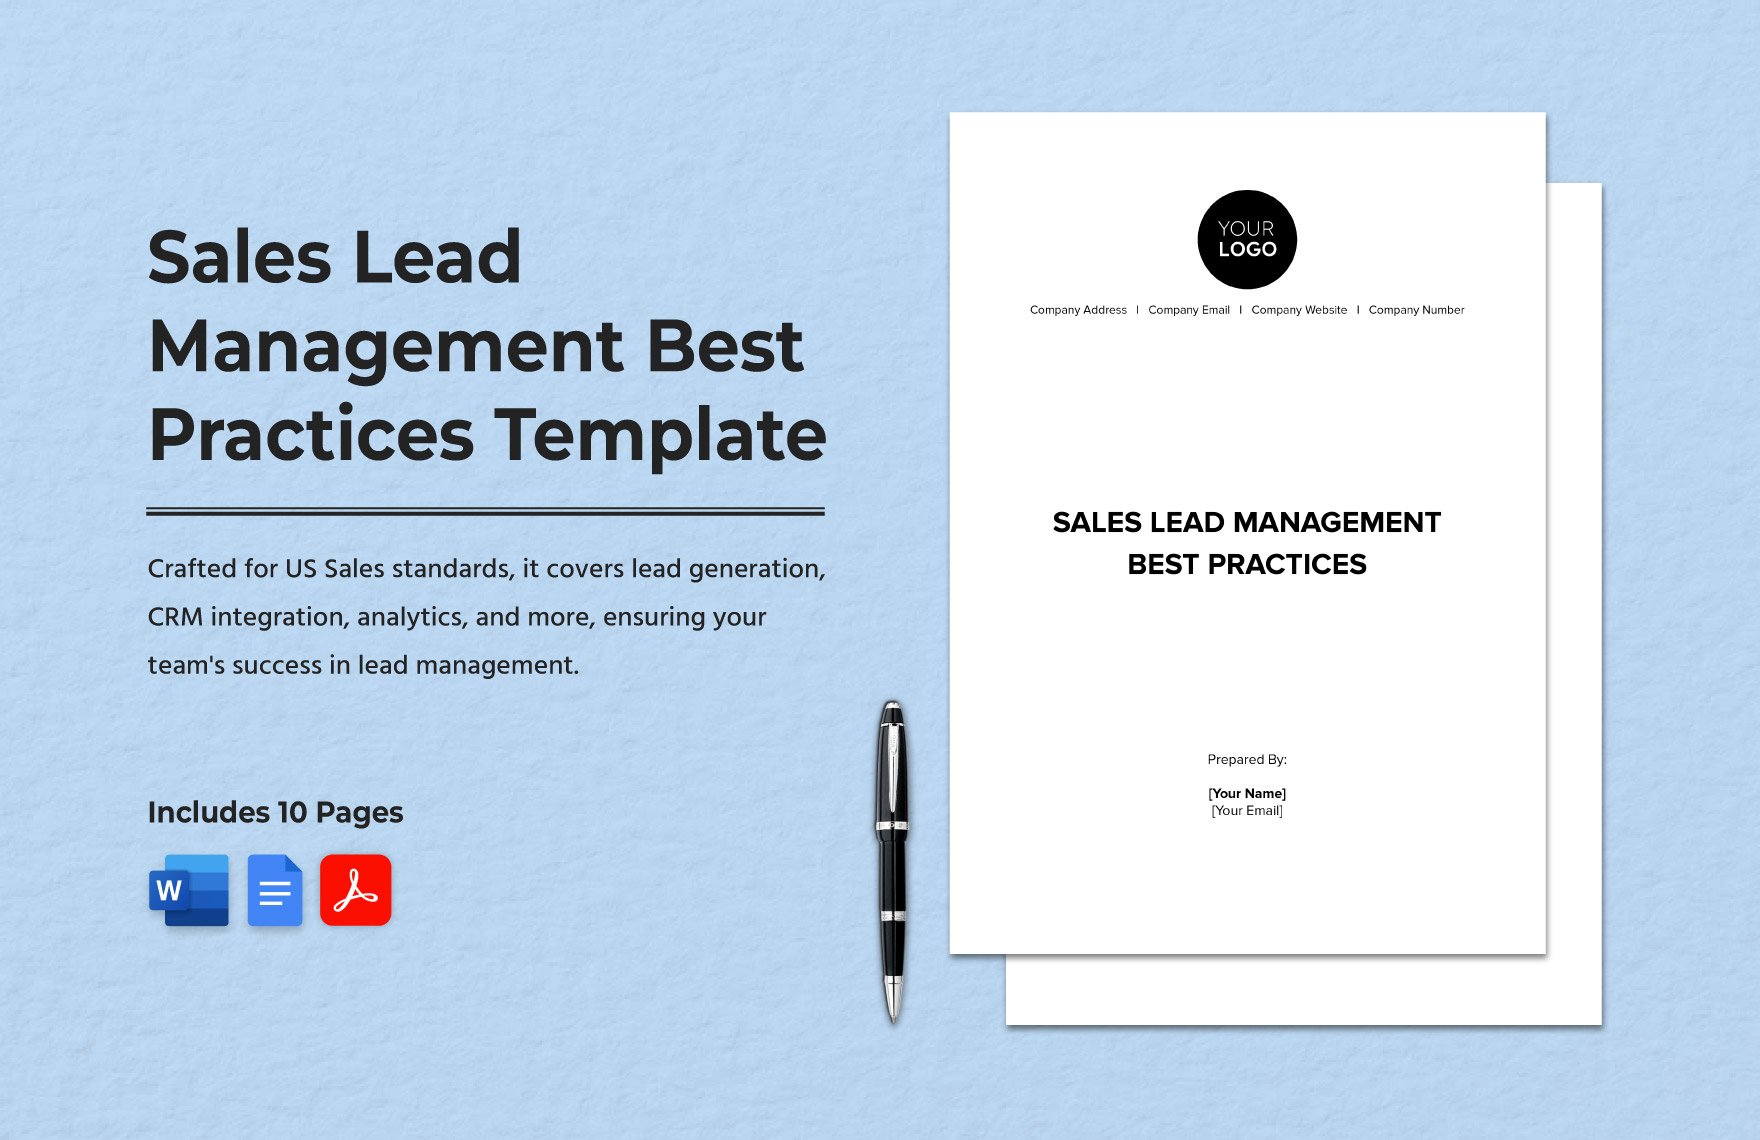 Sales Lead Management Best Practices Template in Word, Google Docs, PDF